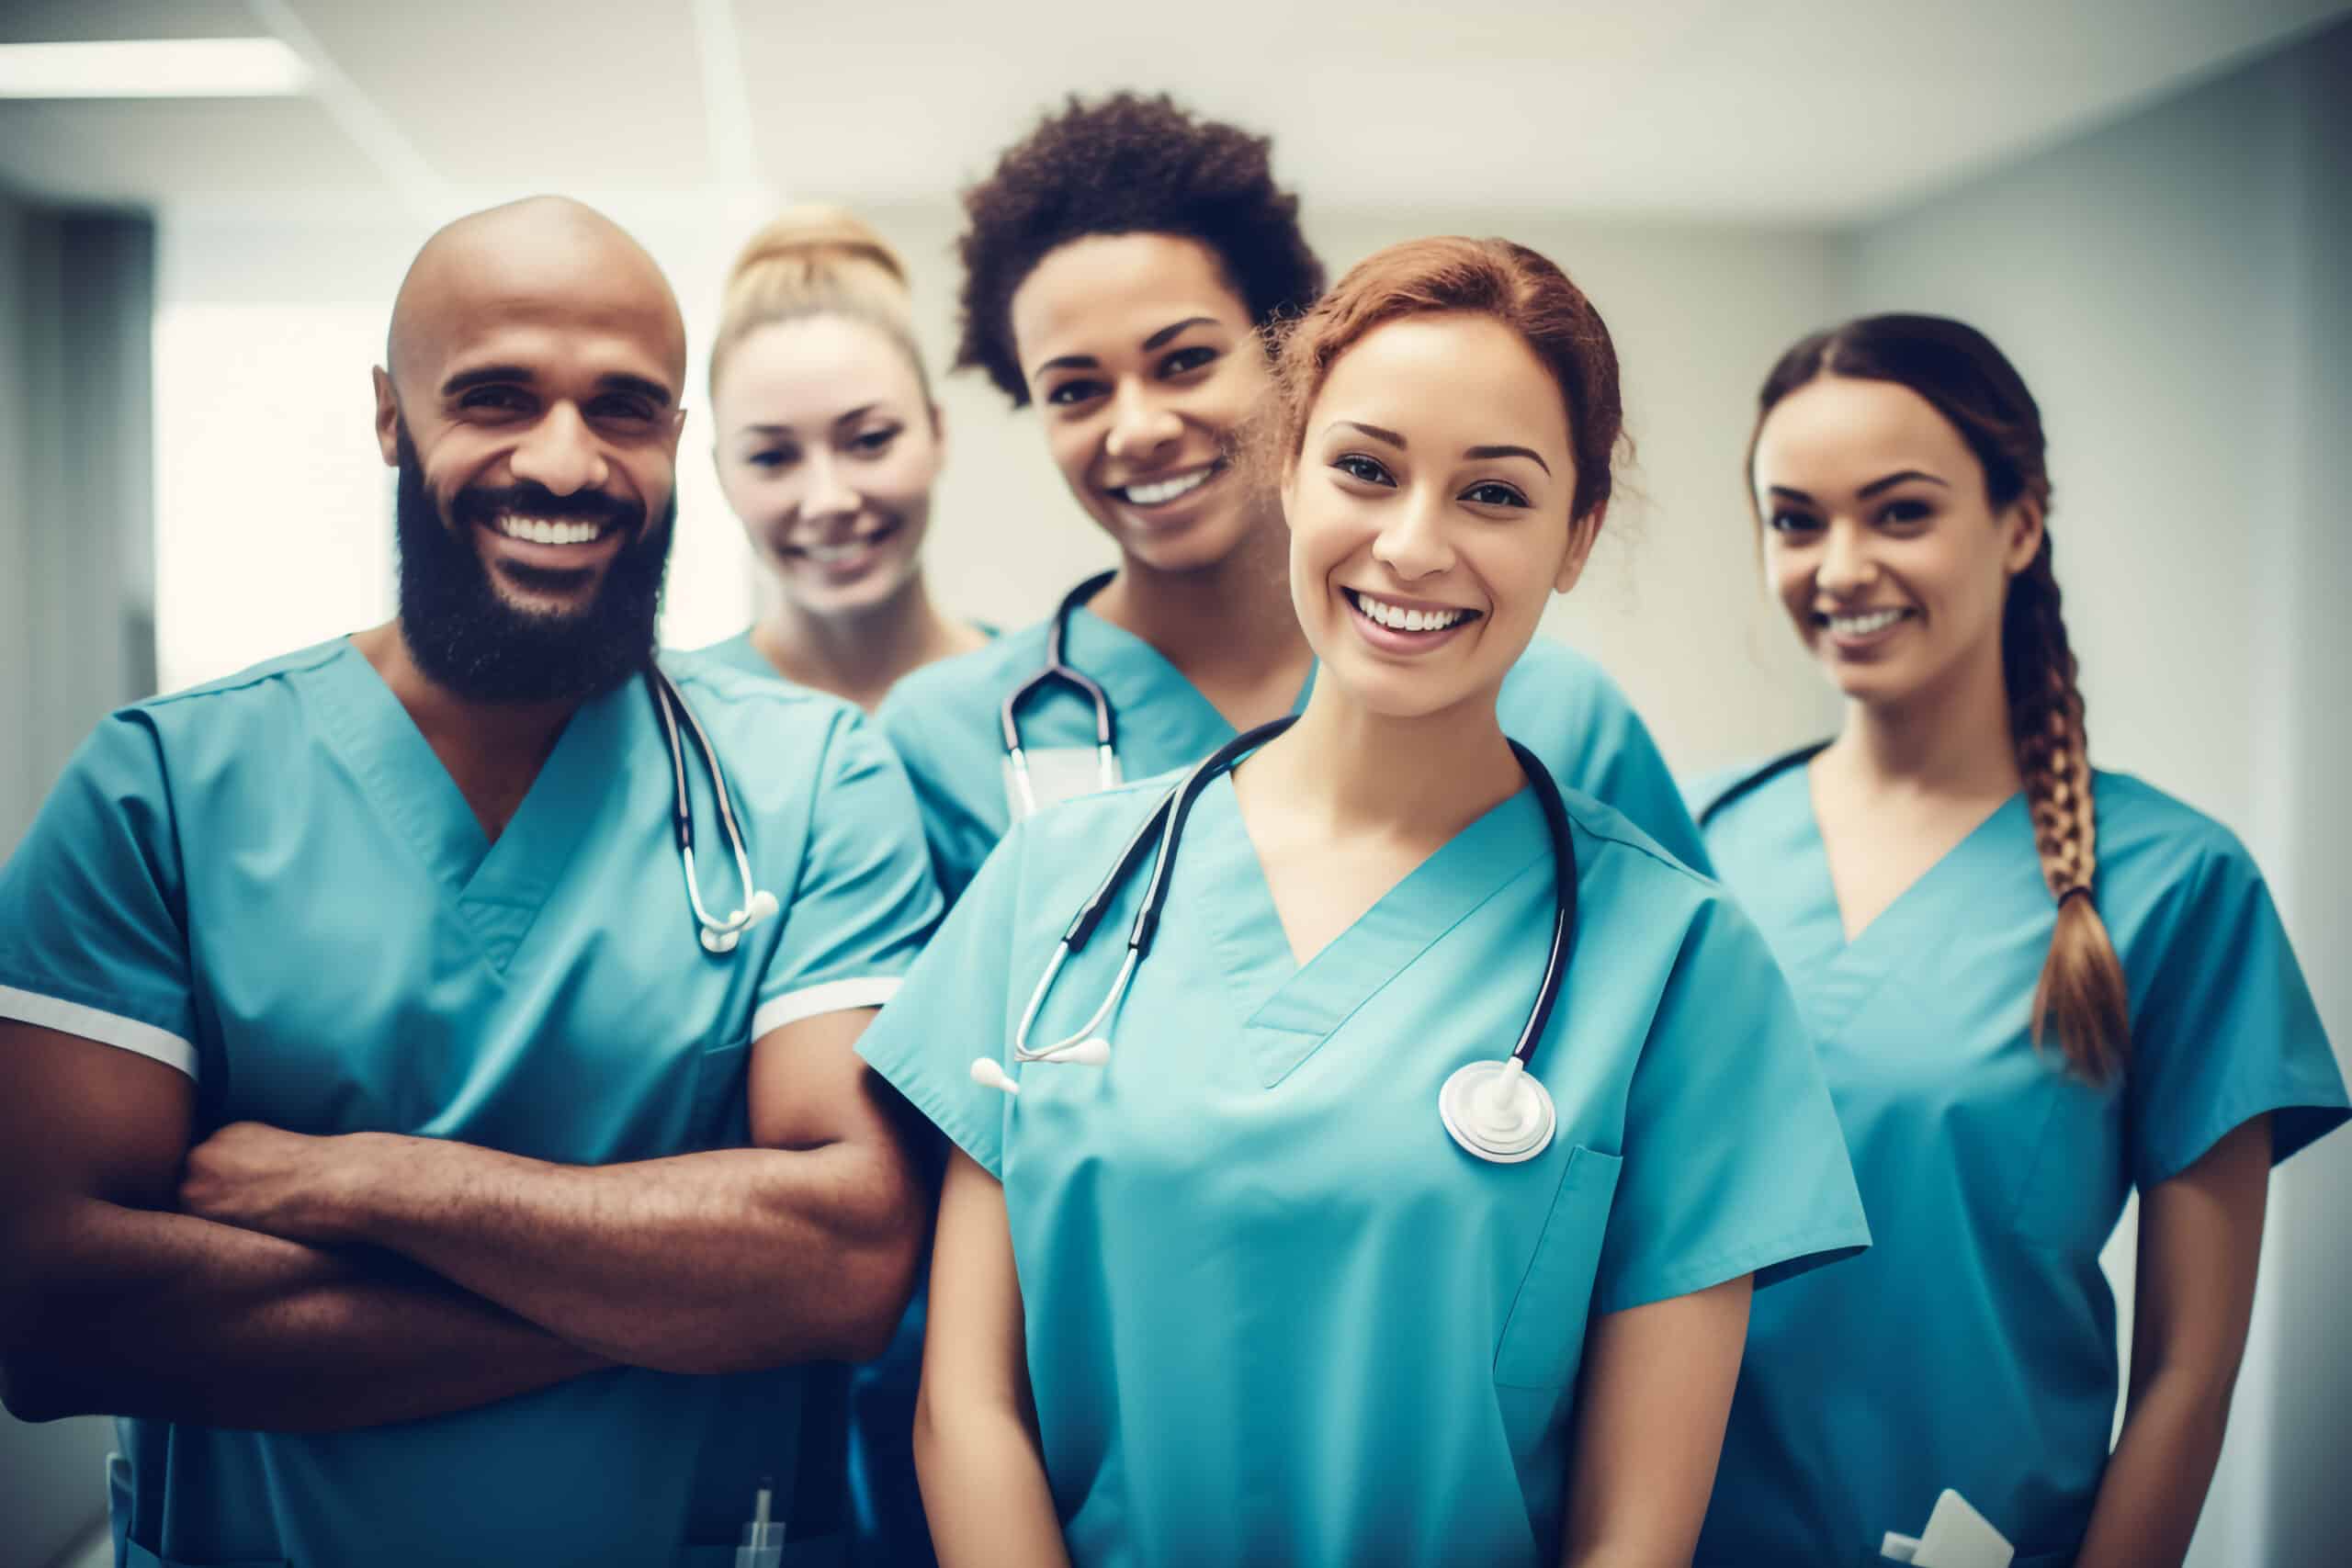 A group of five diverse healthcare professionals in blue scrubs, smiling confidently in a hospital corridor.